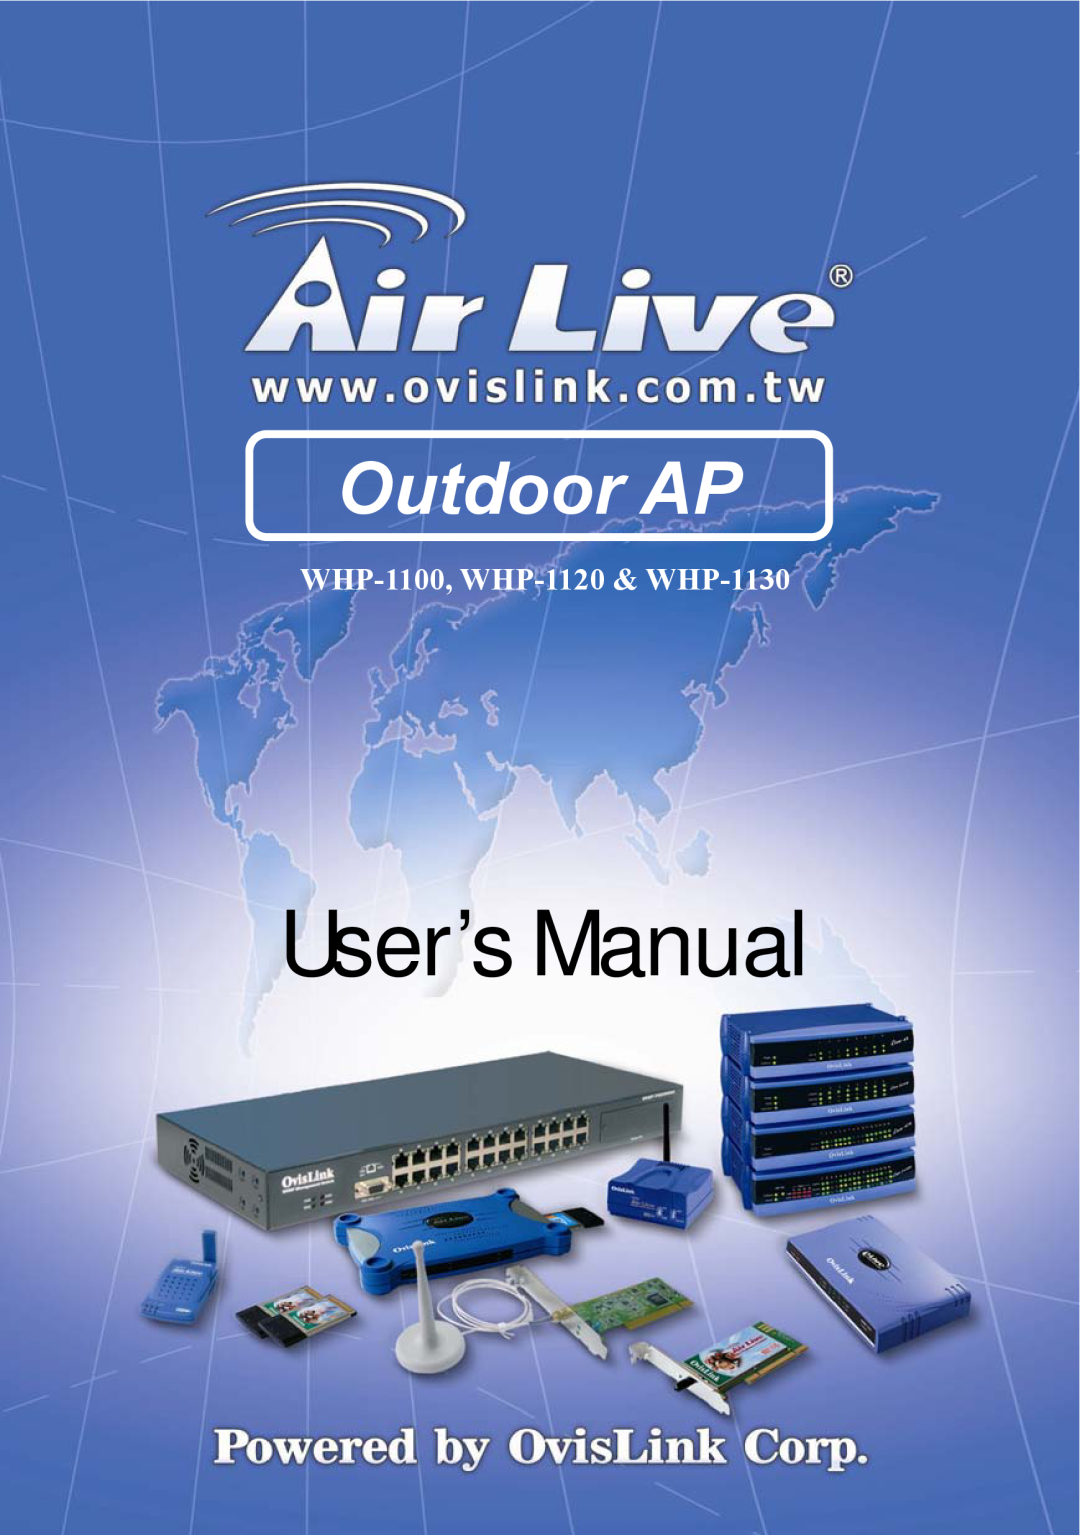 WHP Wireless user manual User’s Manual, Outdoor AP, WHP-1100, WHP-1120 & WHP-1130 